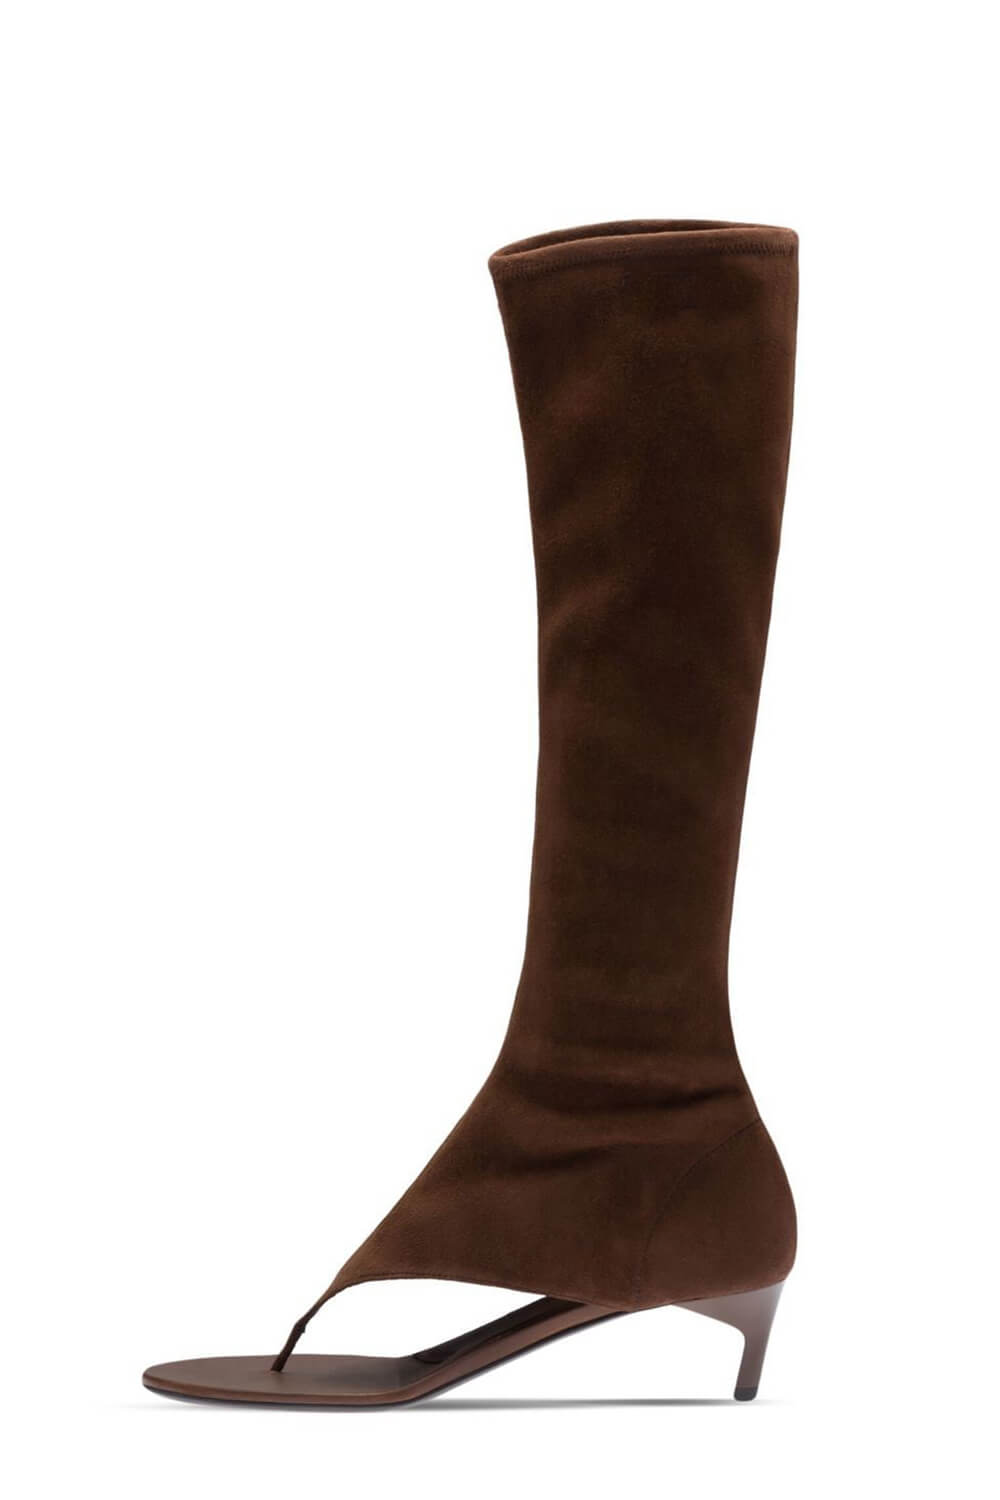 Faux Suede Open Toe Thong Strap Knee High Heeled Boots - Brown